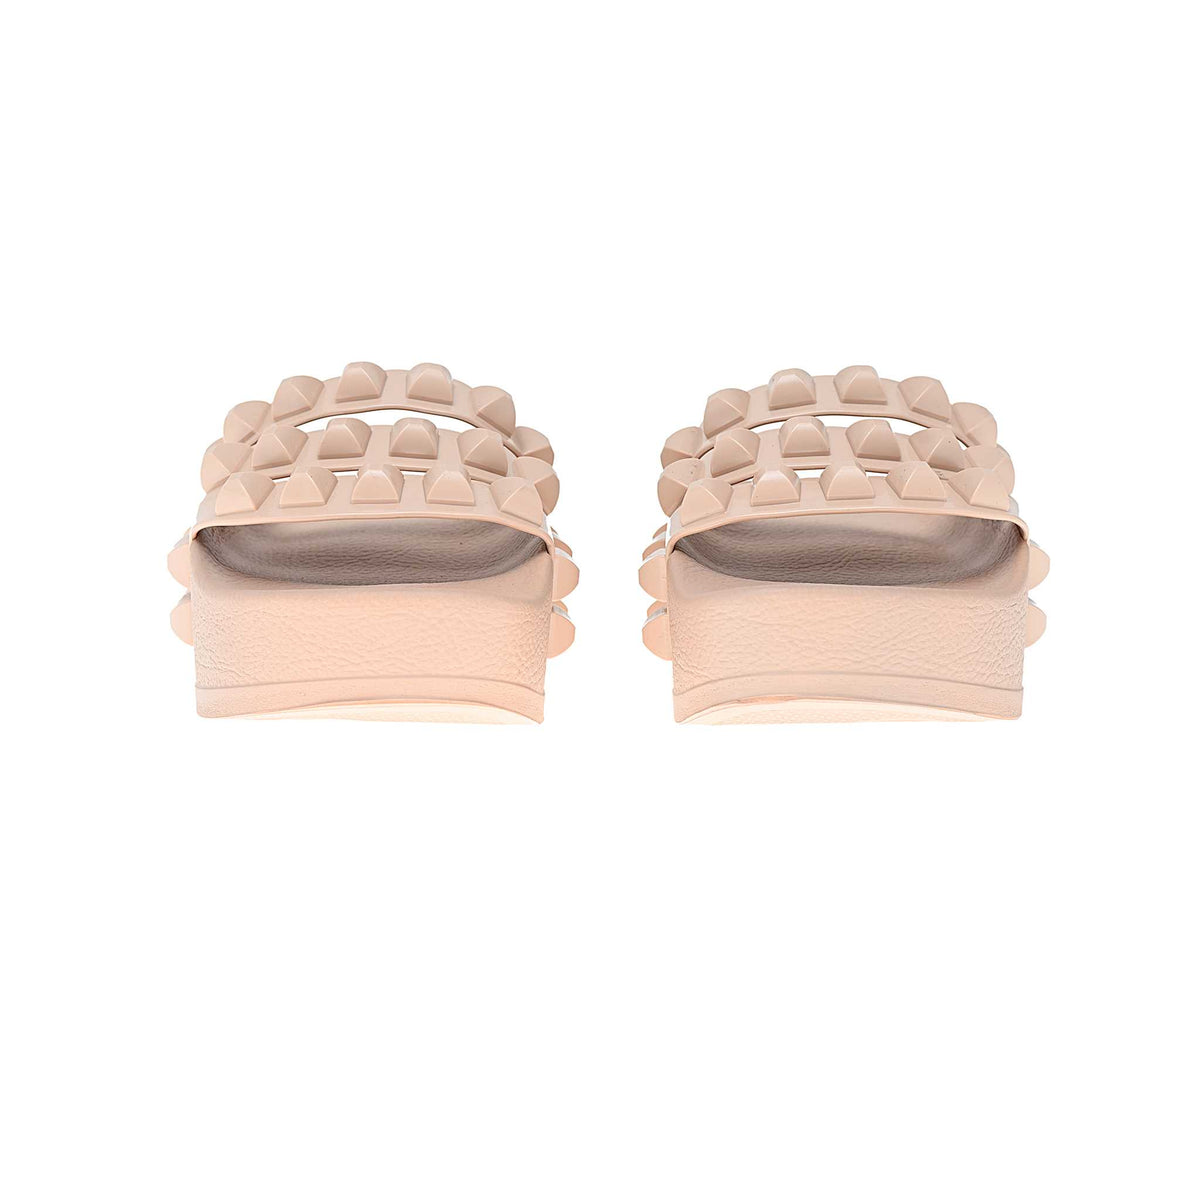 studded jelly platform flip-flop from Carmen Sol that elevate your entire look